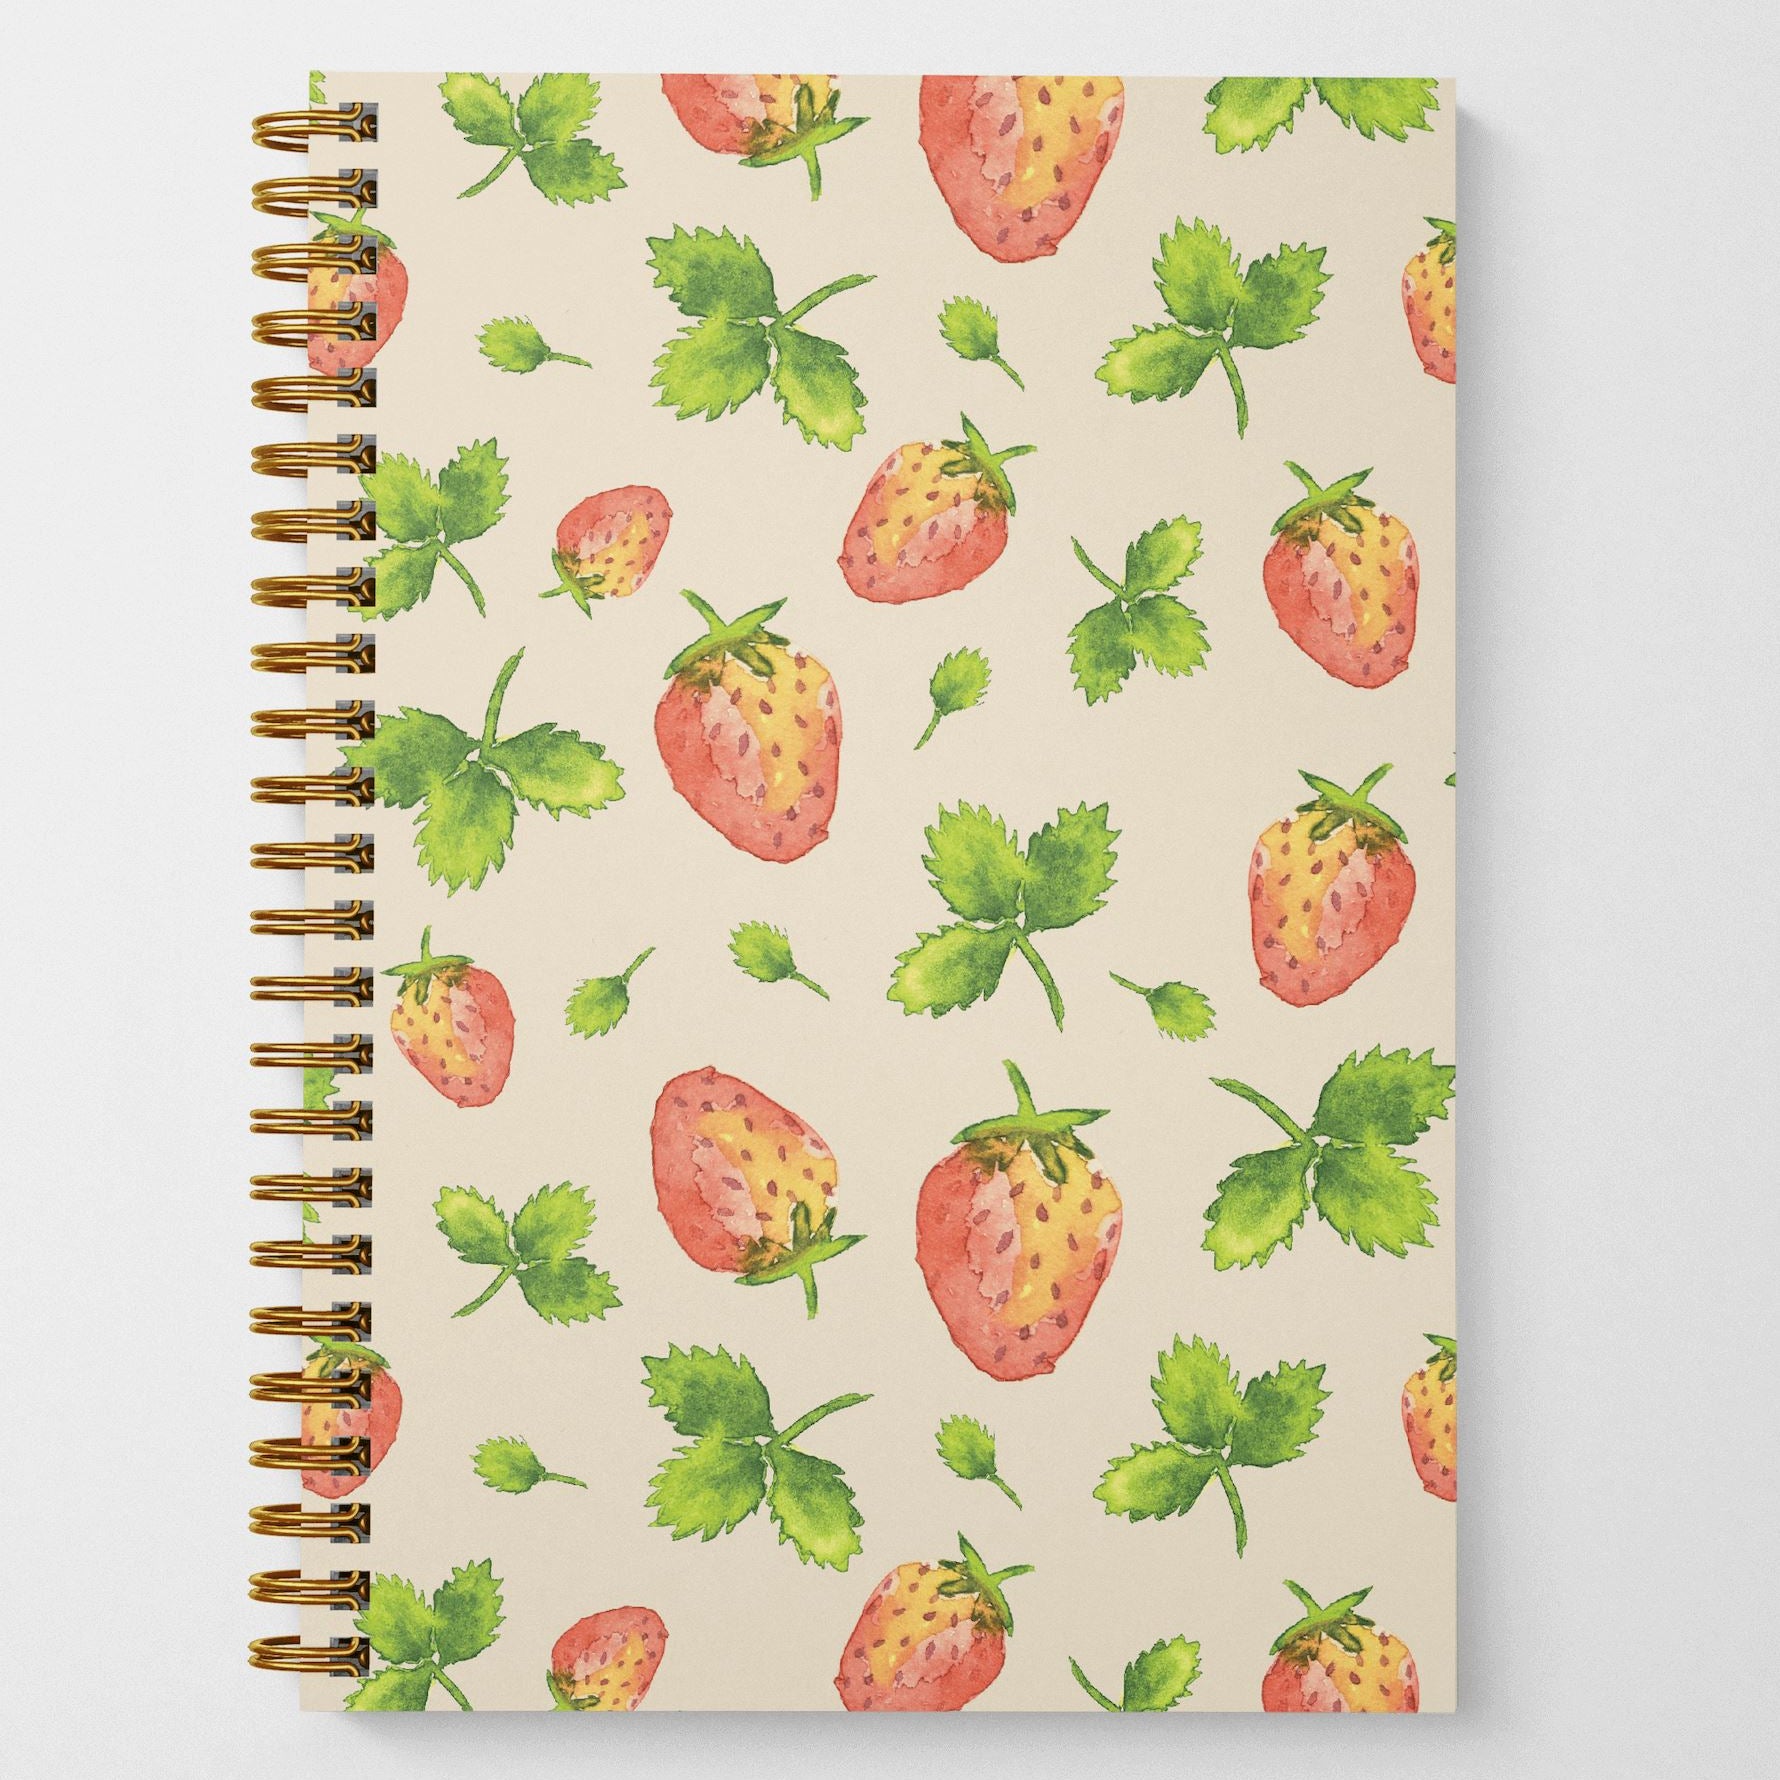 A photo of the front cover of a wire spiral-bound notebook featuring watercolor-painted strawberries and leaves in a tossed pattern.